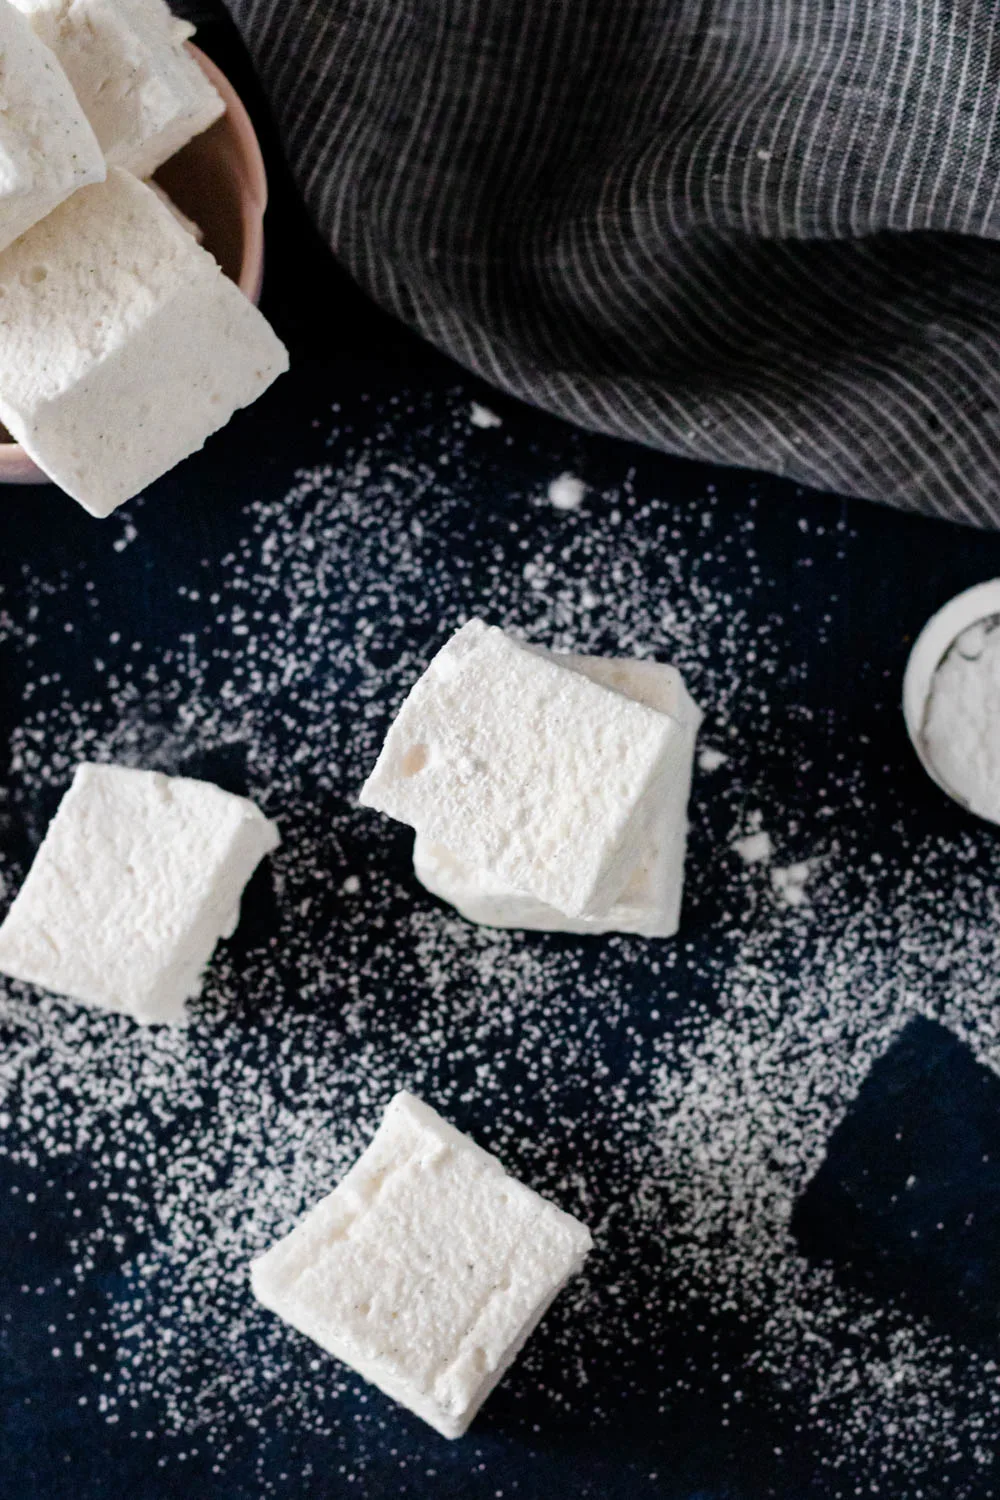 overhead image of cut and dusted marshmallows on a dark surface with a dark pinstripe napkin adding an accent in the top right of the frame